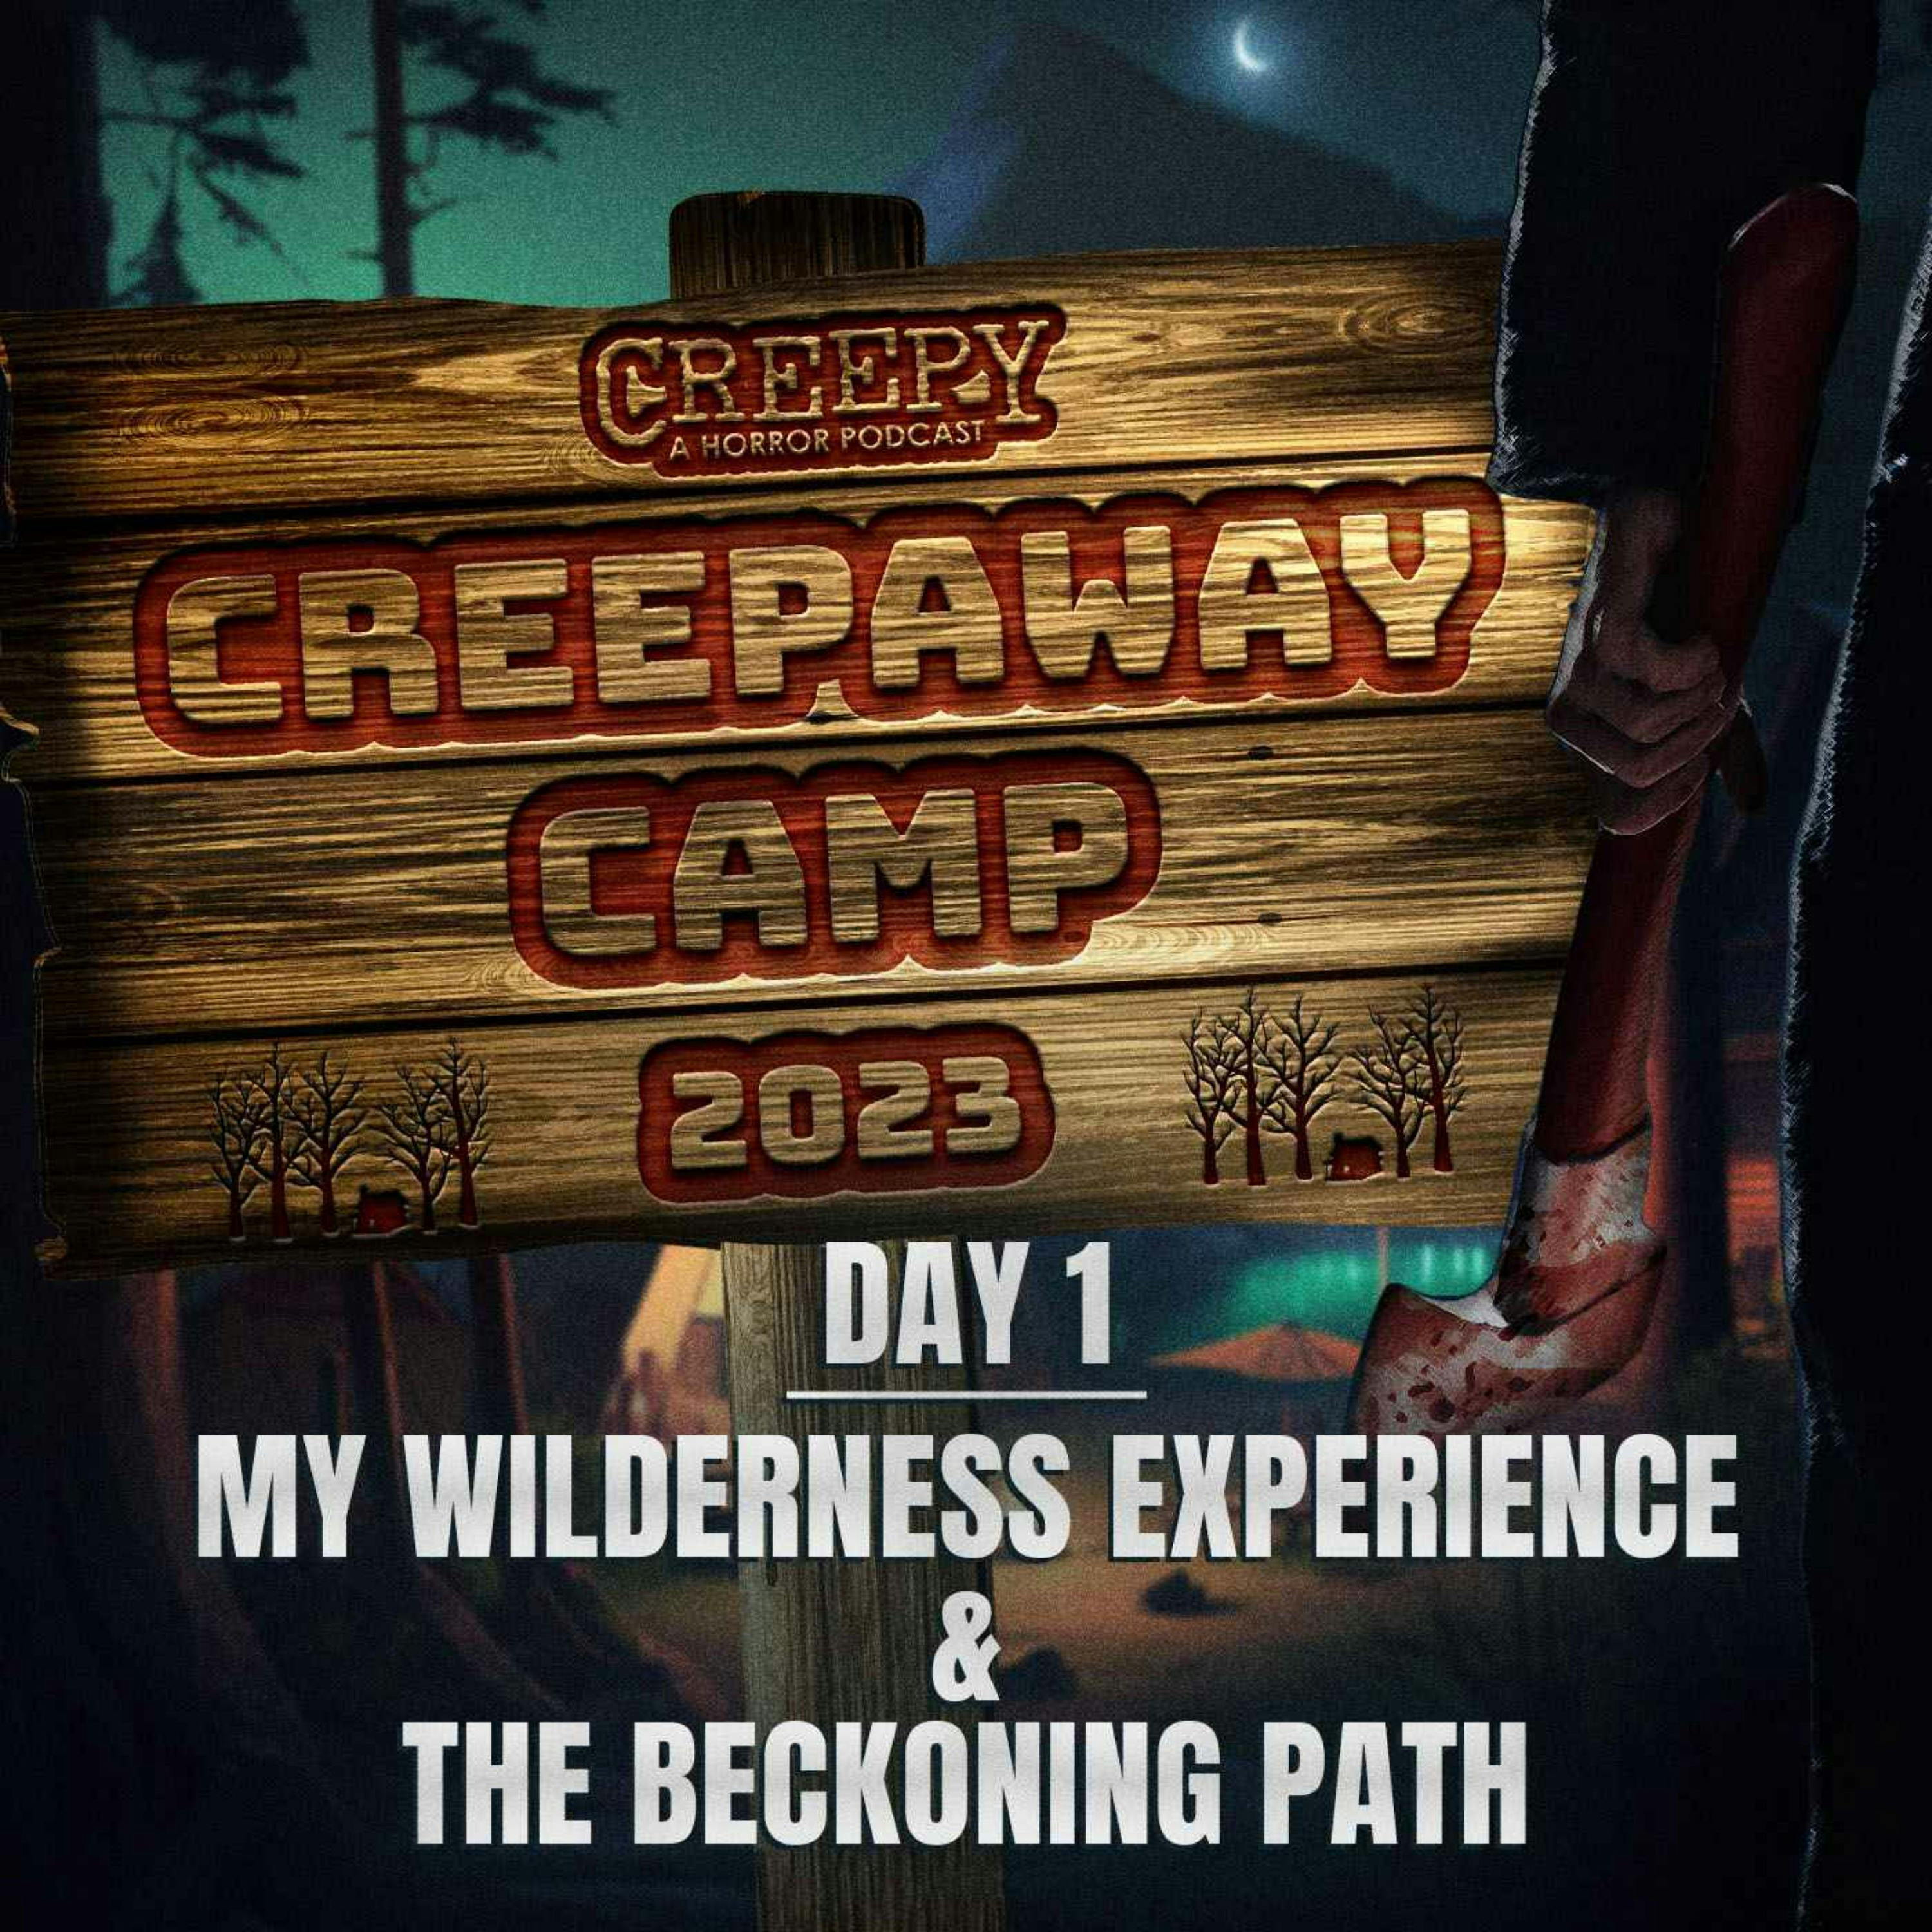 Creepaway Camp 2023 - Day 1: My Wilderness Experience & The Beckoning Path